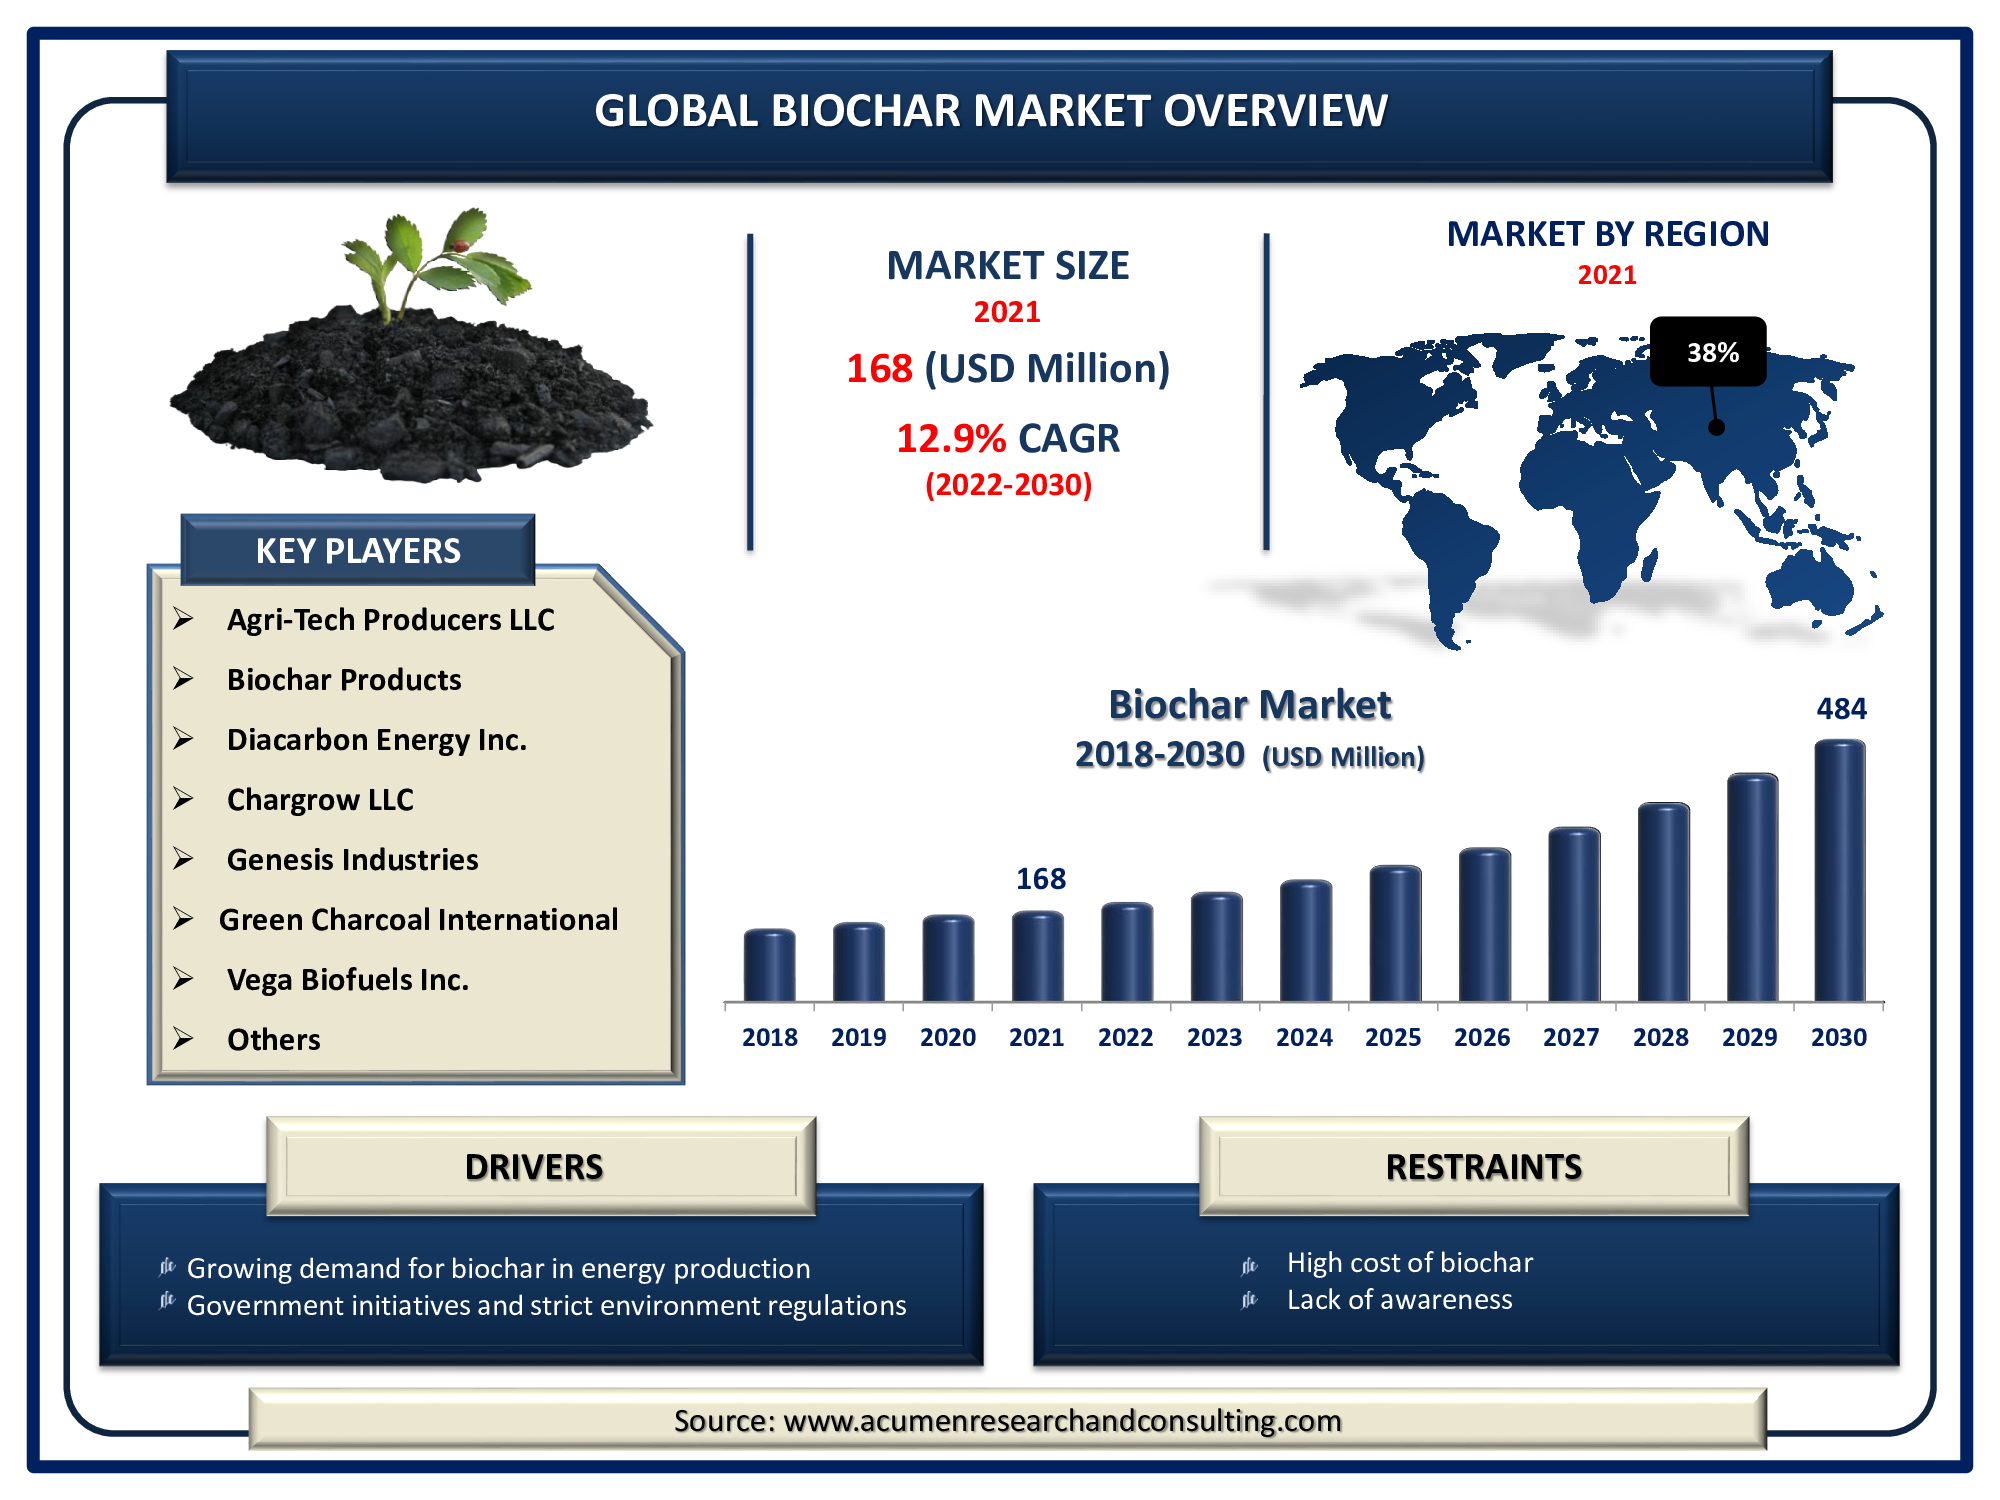 The Global Biochar Market size Accounted for USD 168 Million in 2021 and is predicted to be worth USD 484 Million by 2030, with a CAGR of 12.9% during the projected period from 2022 to 2030.